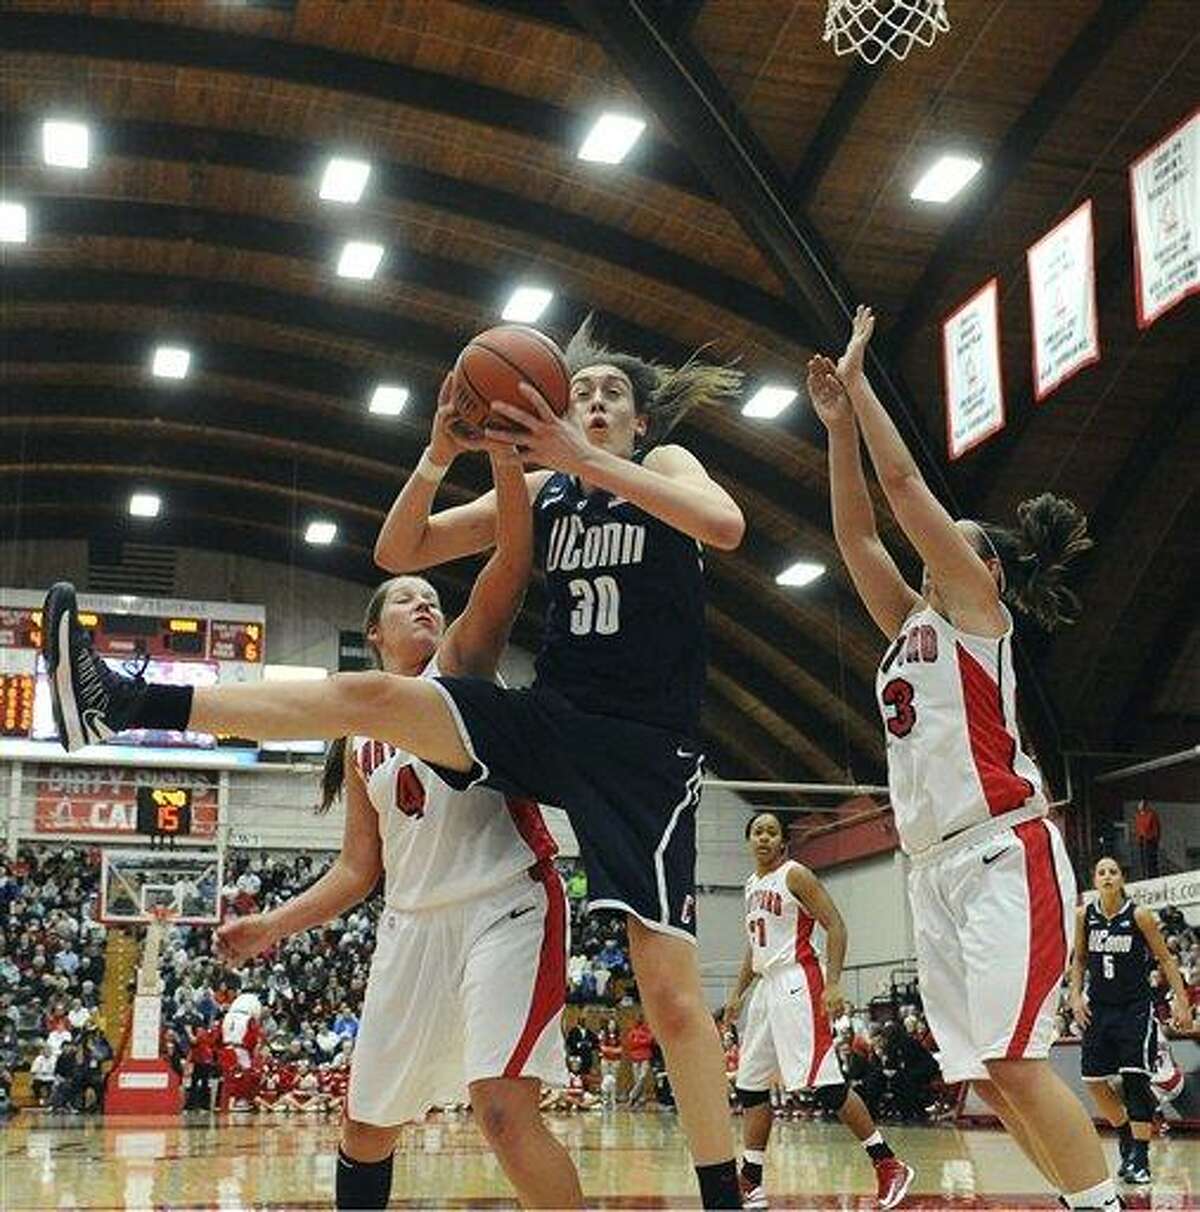 Connecticut's Breanna Stewart, center, snags a rebound while guarded by Hartford's Christie Michals, left, and Taylor Clark, right, during the second half of an NCAA women's college basketball game in West Hartford, Conn., Saturday, Dec. 22, 2012. Connecticut won 102-45. (AP Photo/Jessica Hill)